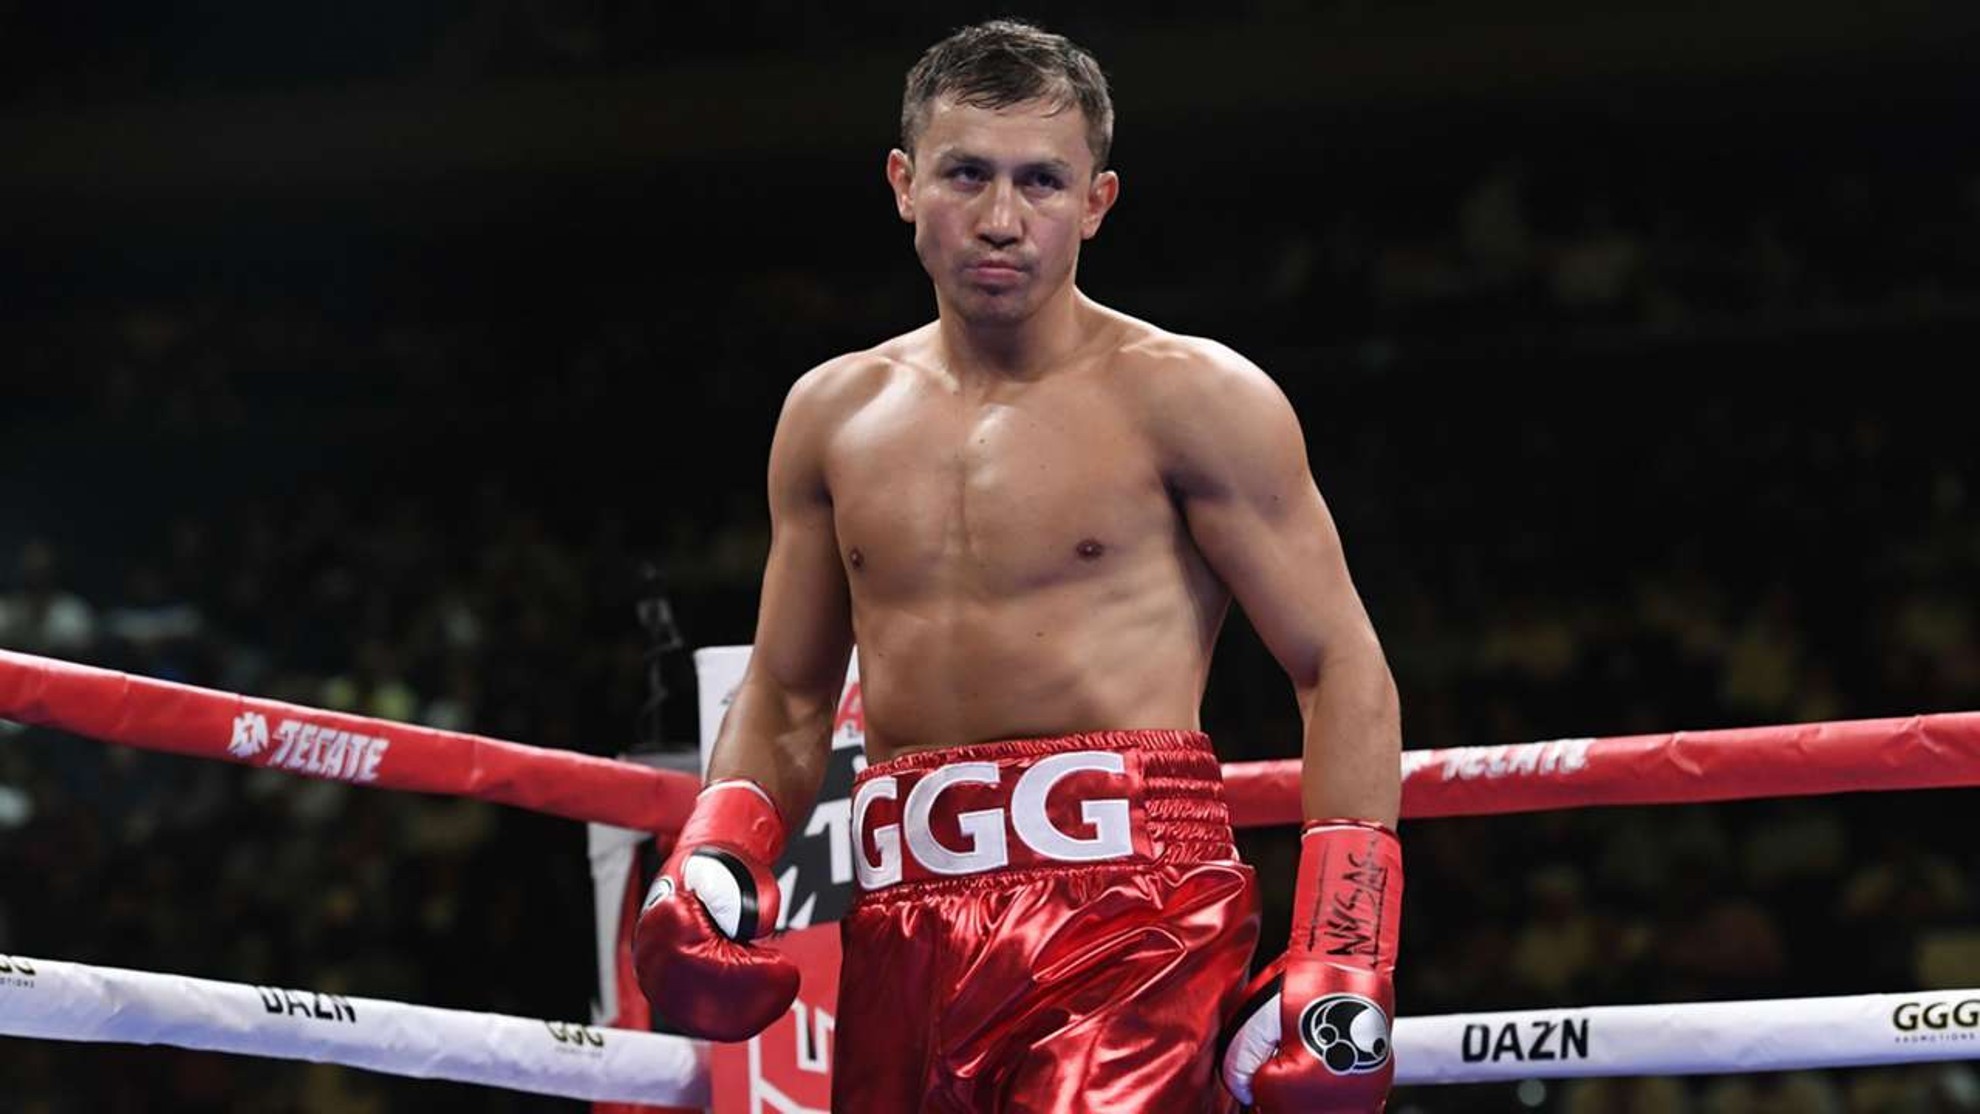 Gennady Golovkin Biography: Nationality, Age, Net Worth, Instagram, Parents, Wikipedia, Pictures, Children